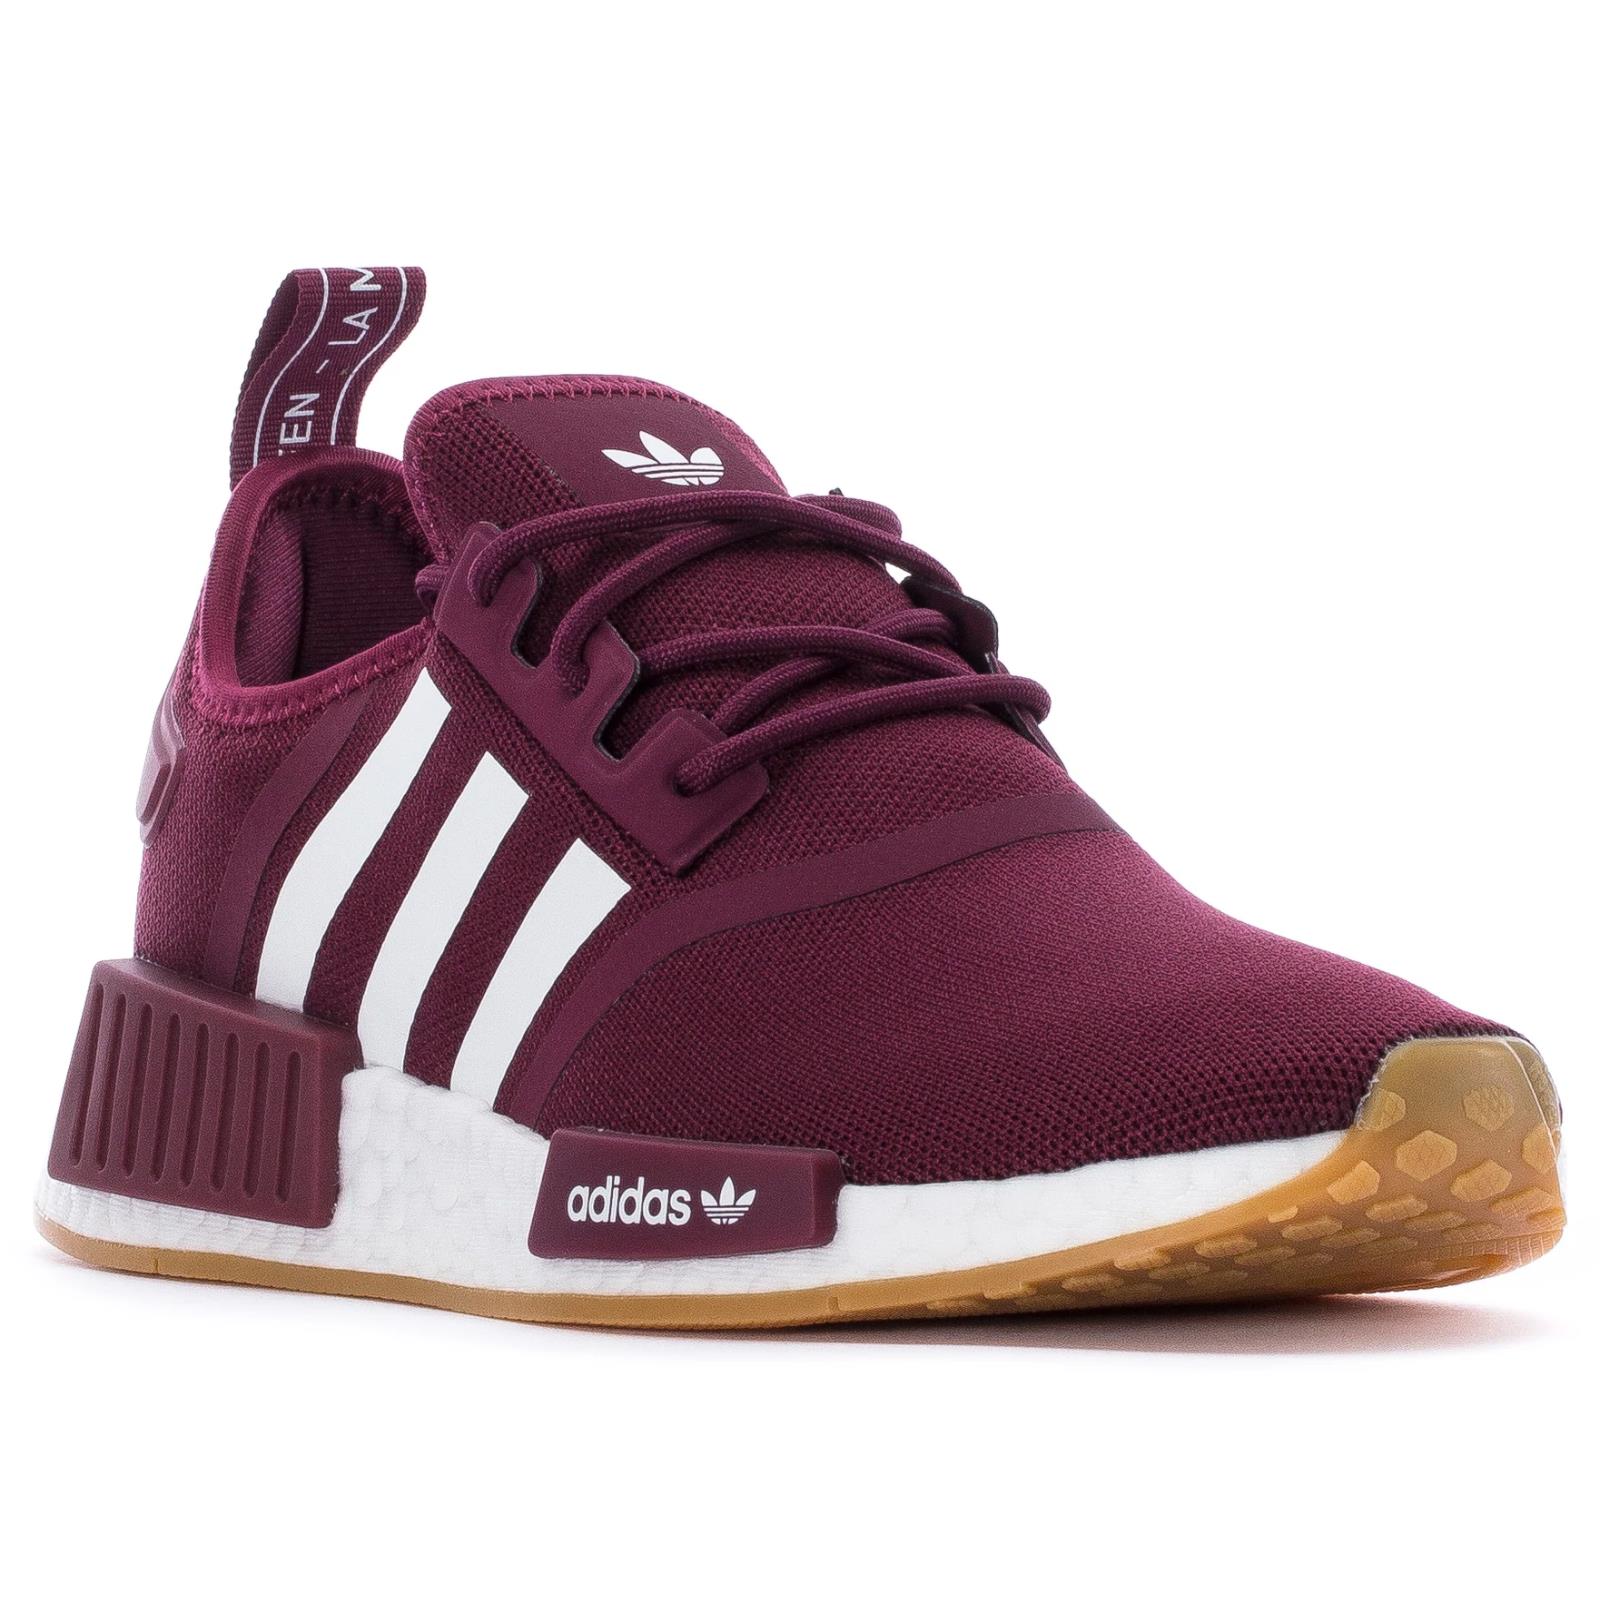 Adidas shoes NMD - Red 4